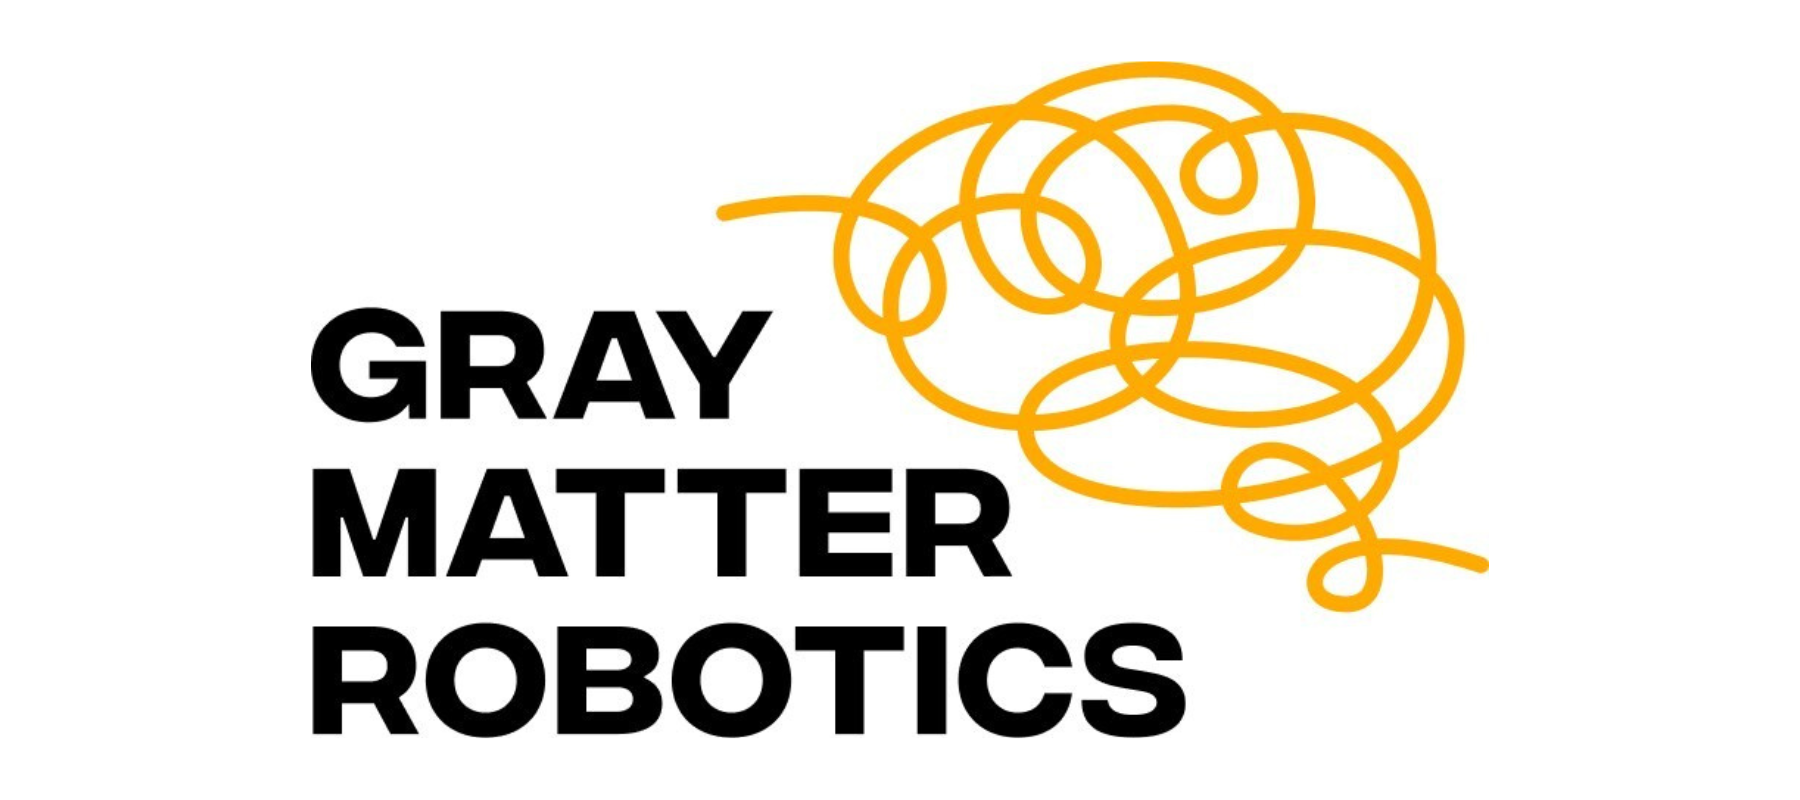 GrayMatter raises $45m to accelerate AI-powered robotics solutions for manufacturing challenges